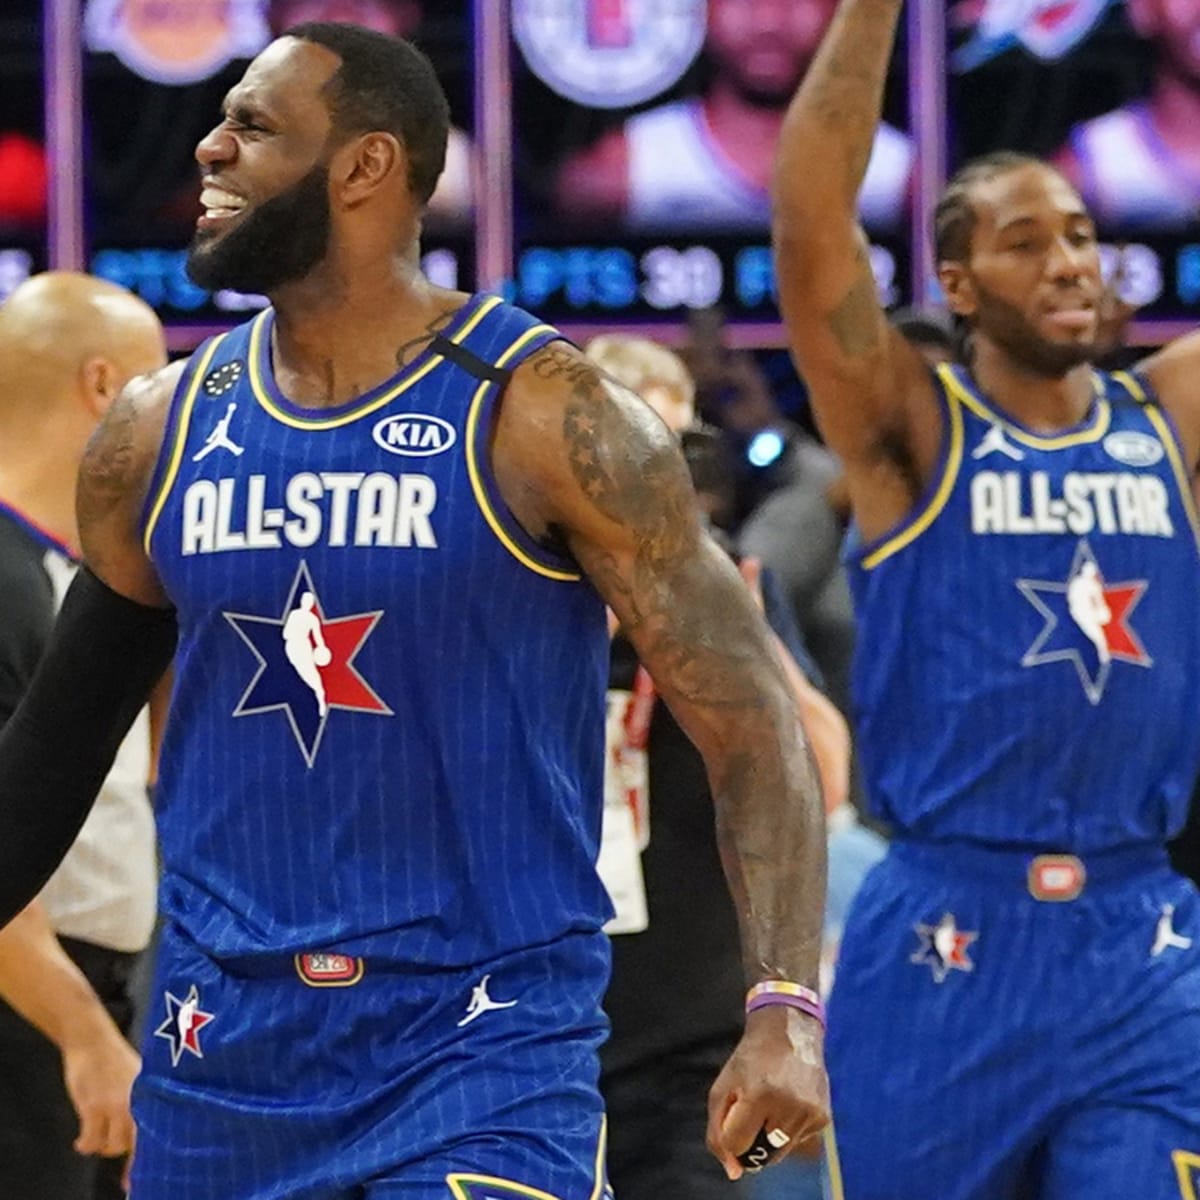 NBA to hold 2021 All-Star Game despite players' concerns during